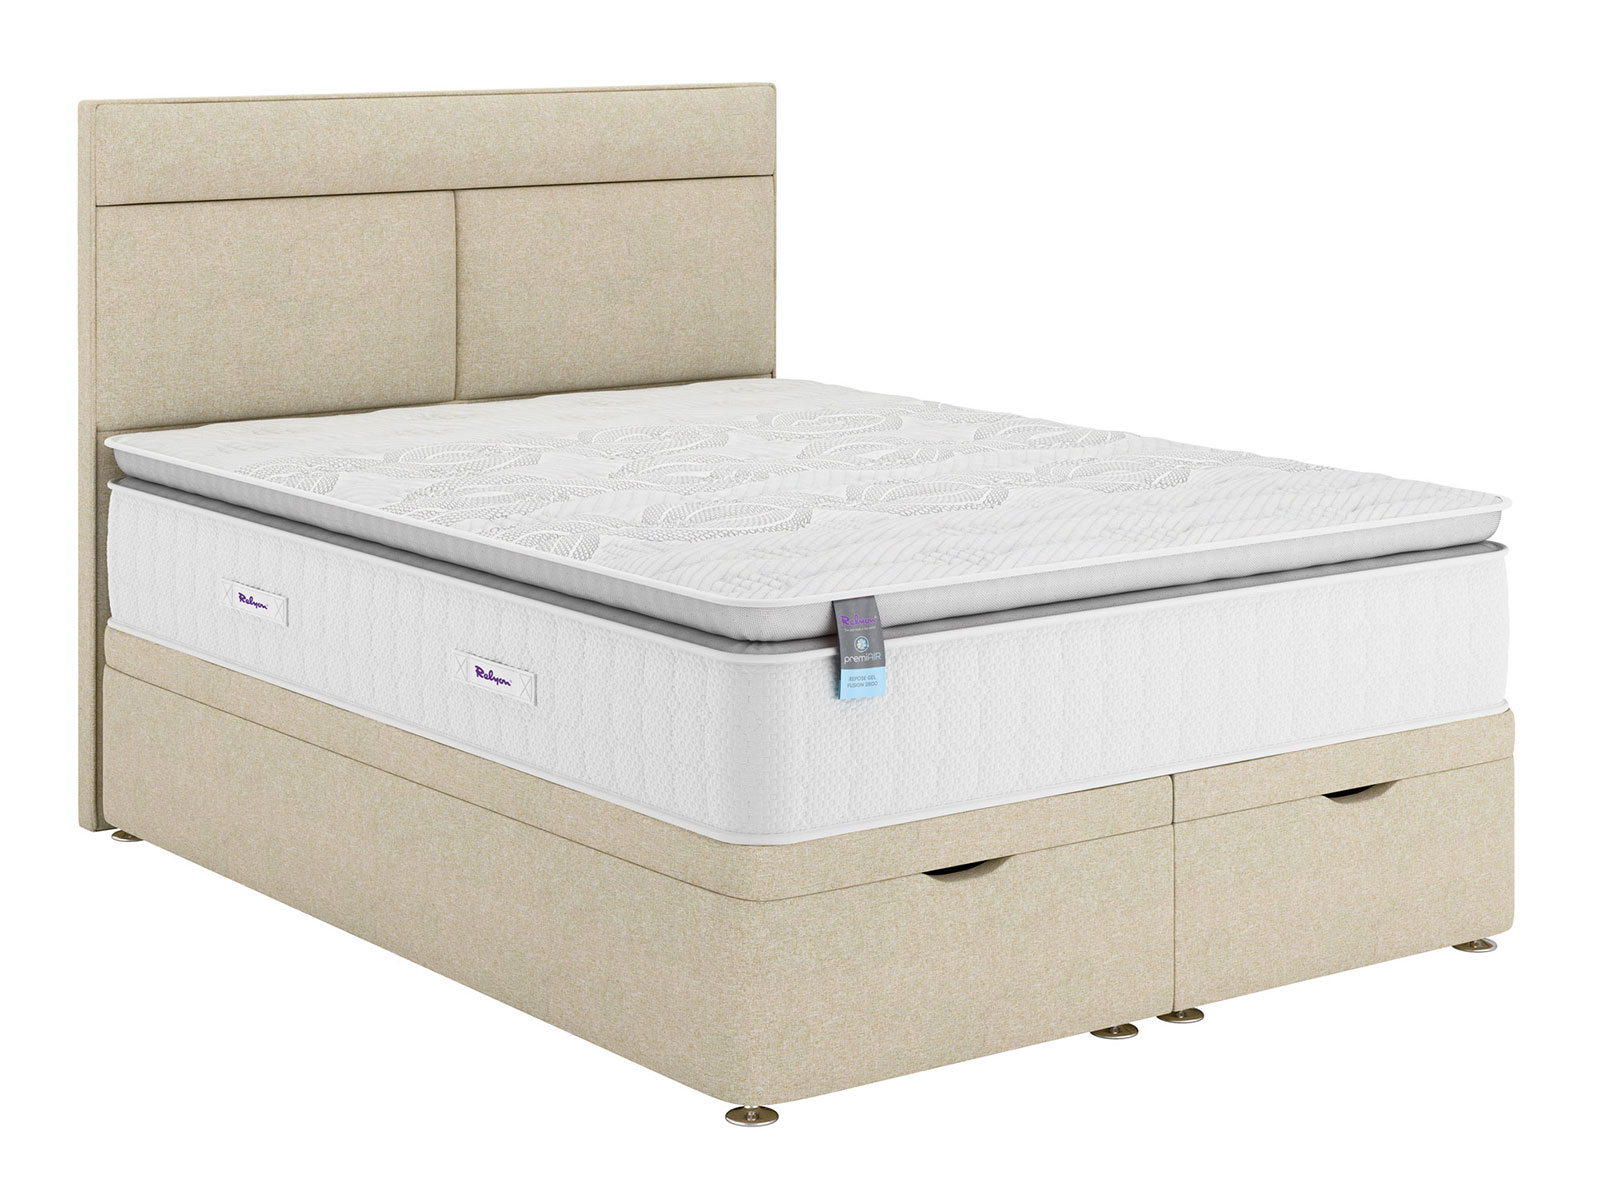 4ft6 Double Relyon Contemporary Gel Fusion 2800 Mattress